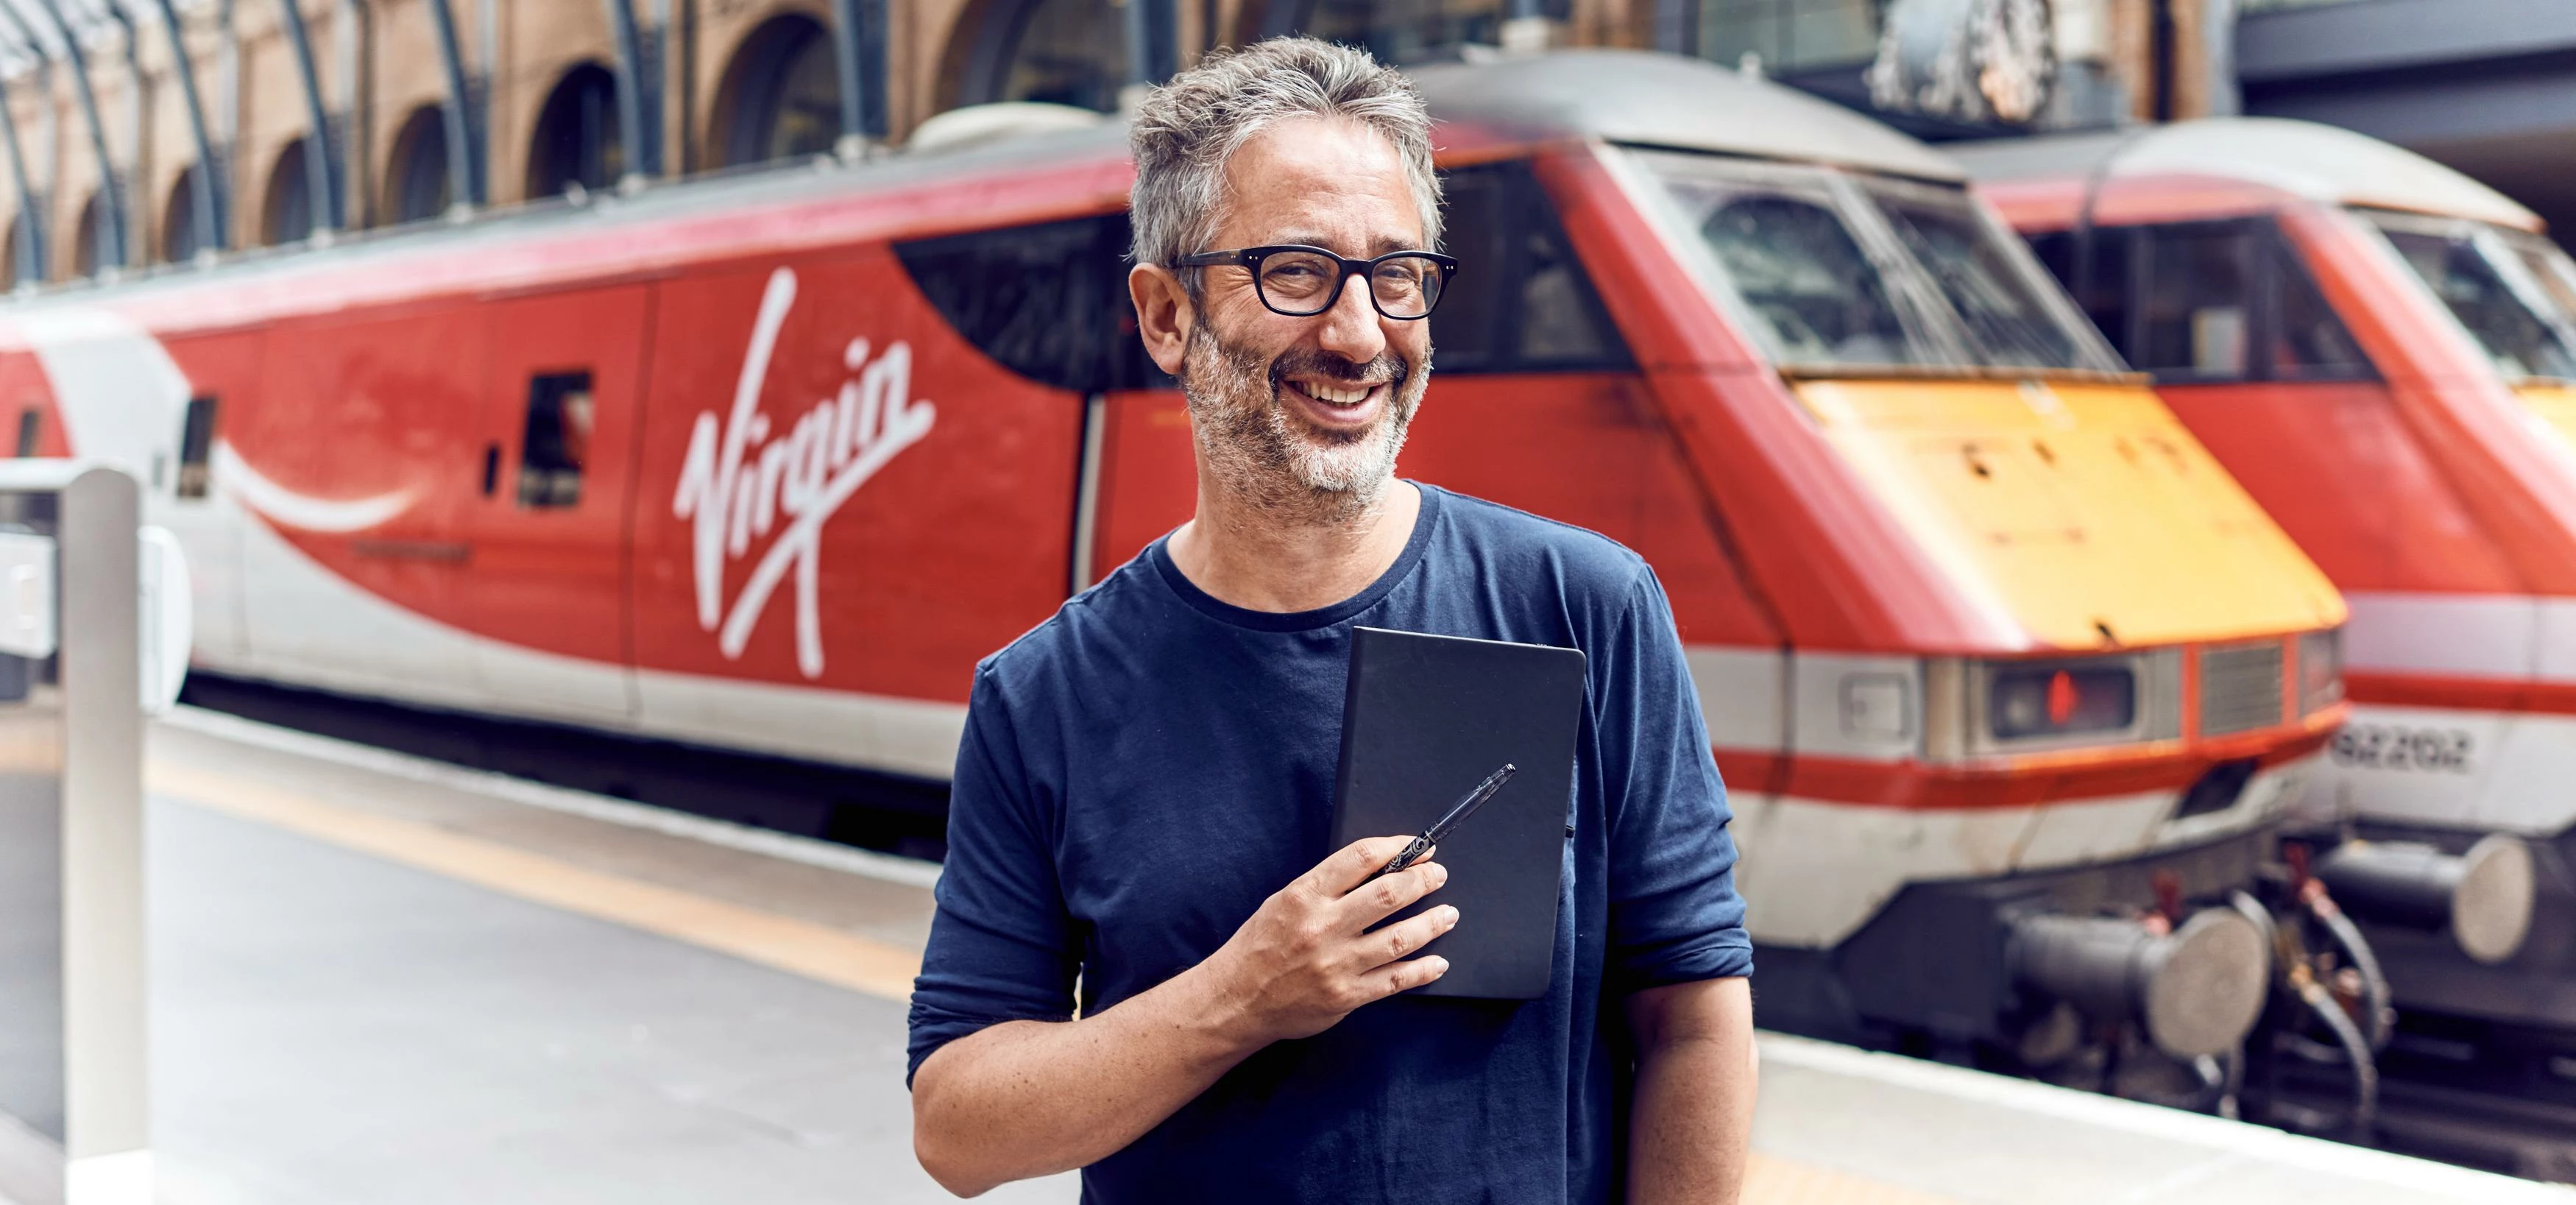 David Baddiel’s new children’s story launches exclusively on Virgin Trains